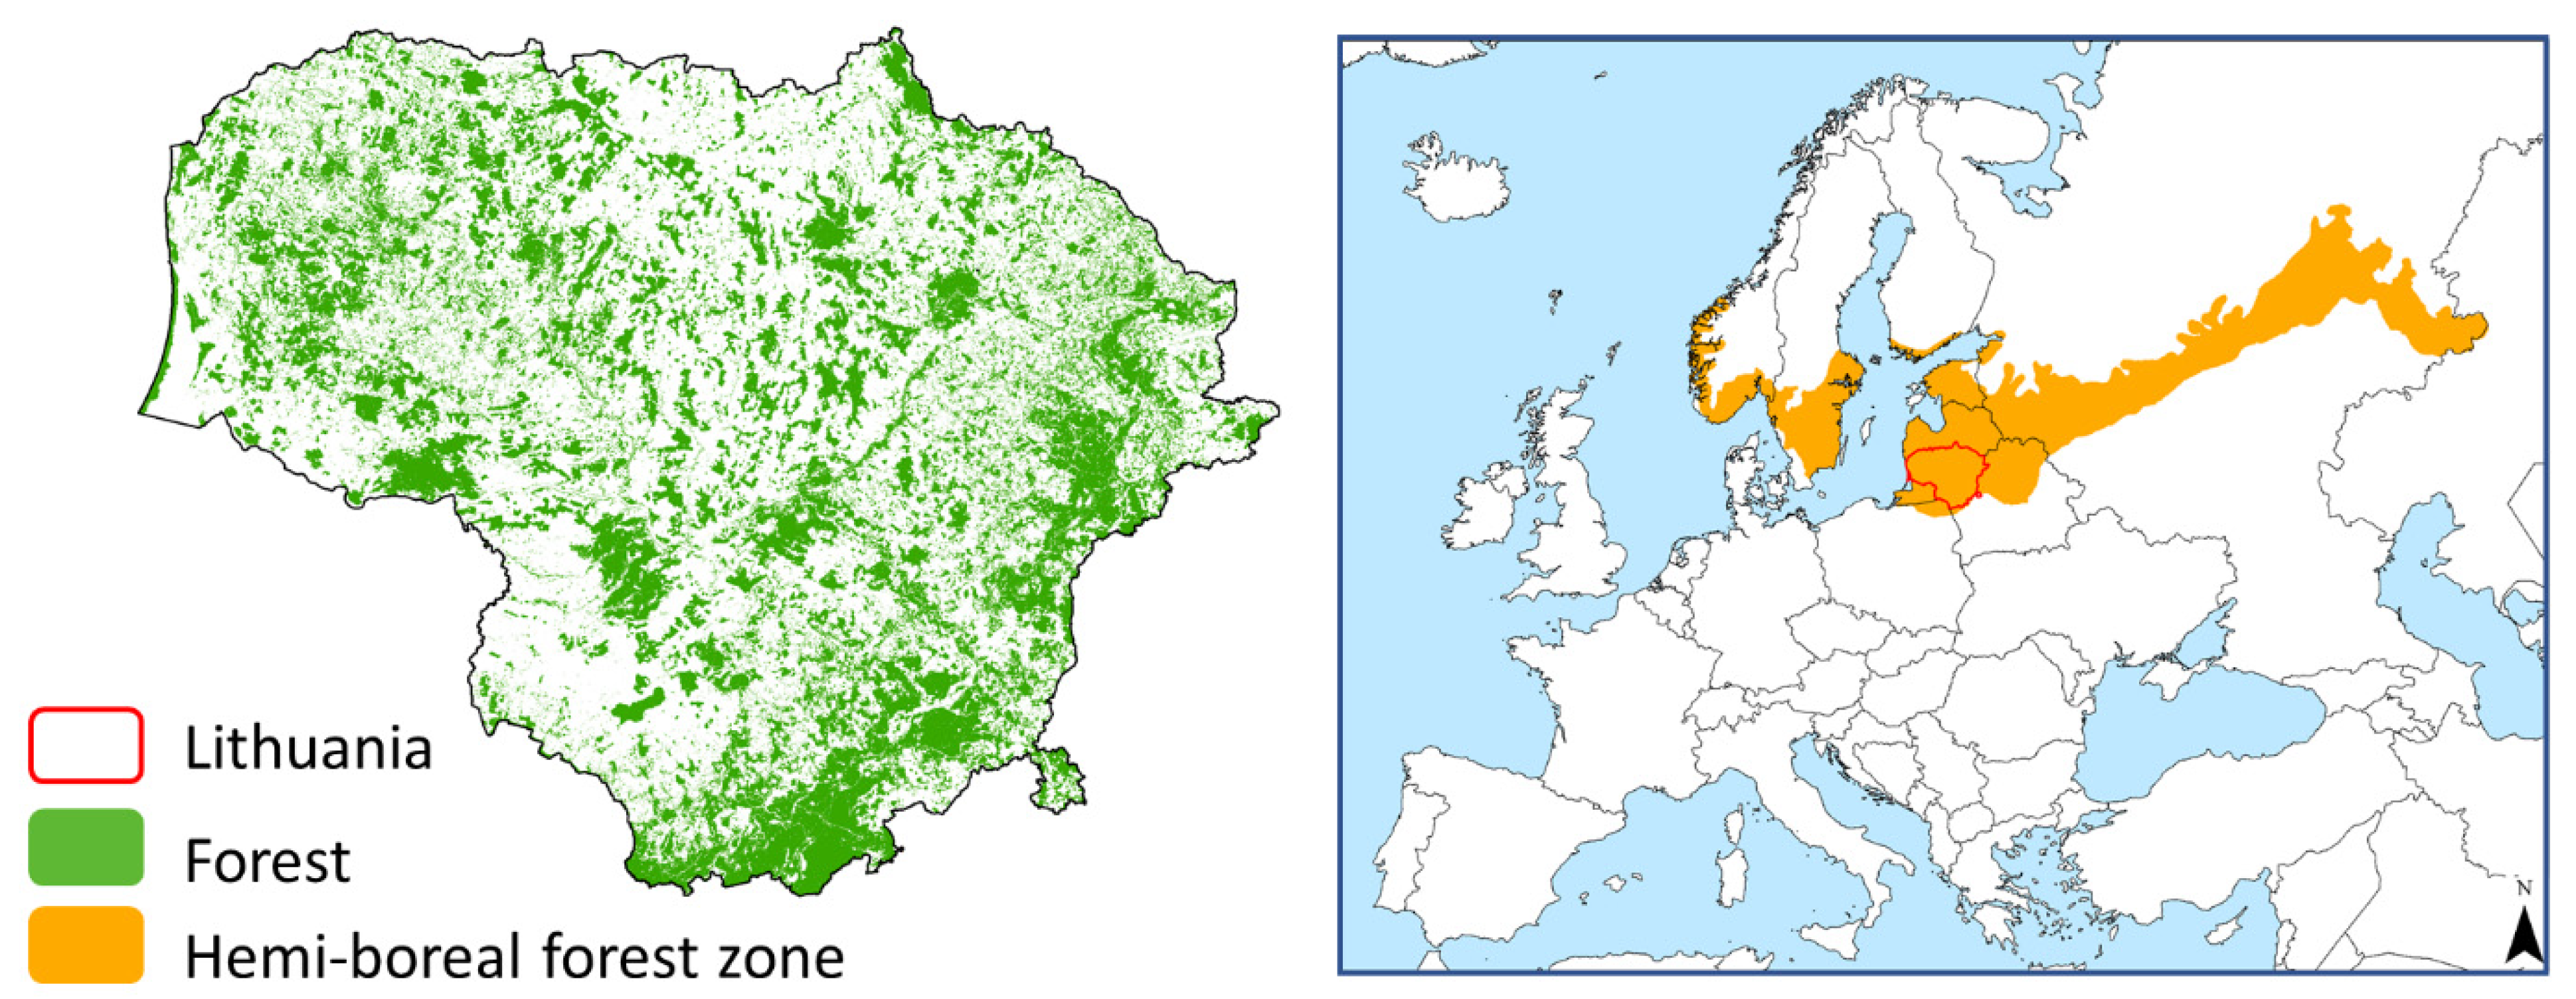 Land | Free Full-Text | Fire Occurrence in Hemi-Boreal Forests: Exploring  Natural and Cultural Scots Pine Fire Regimes Using Dendrochronology in  Lithuania | HTML